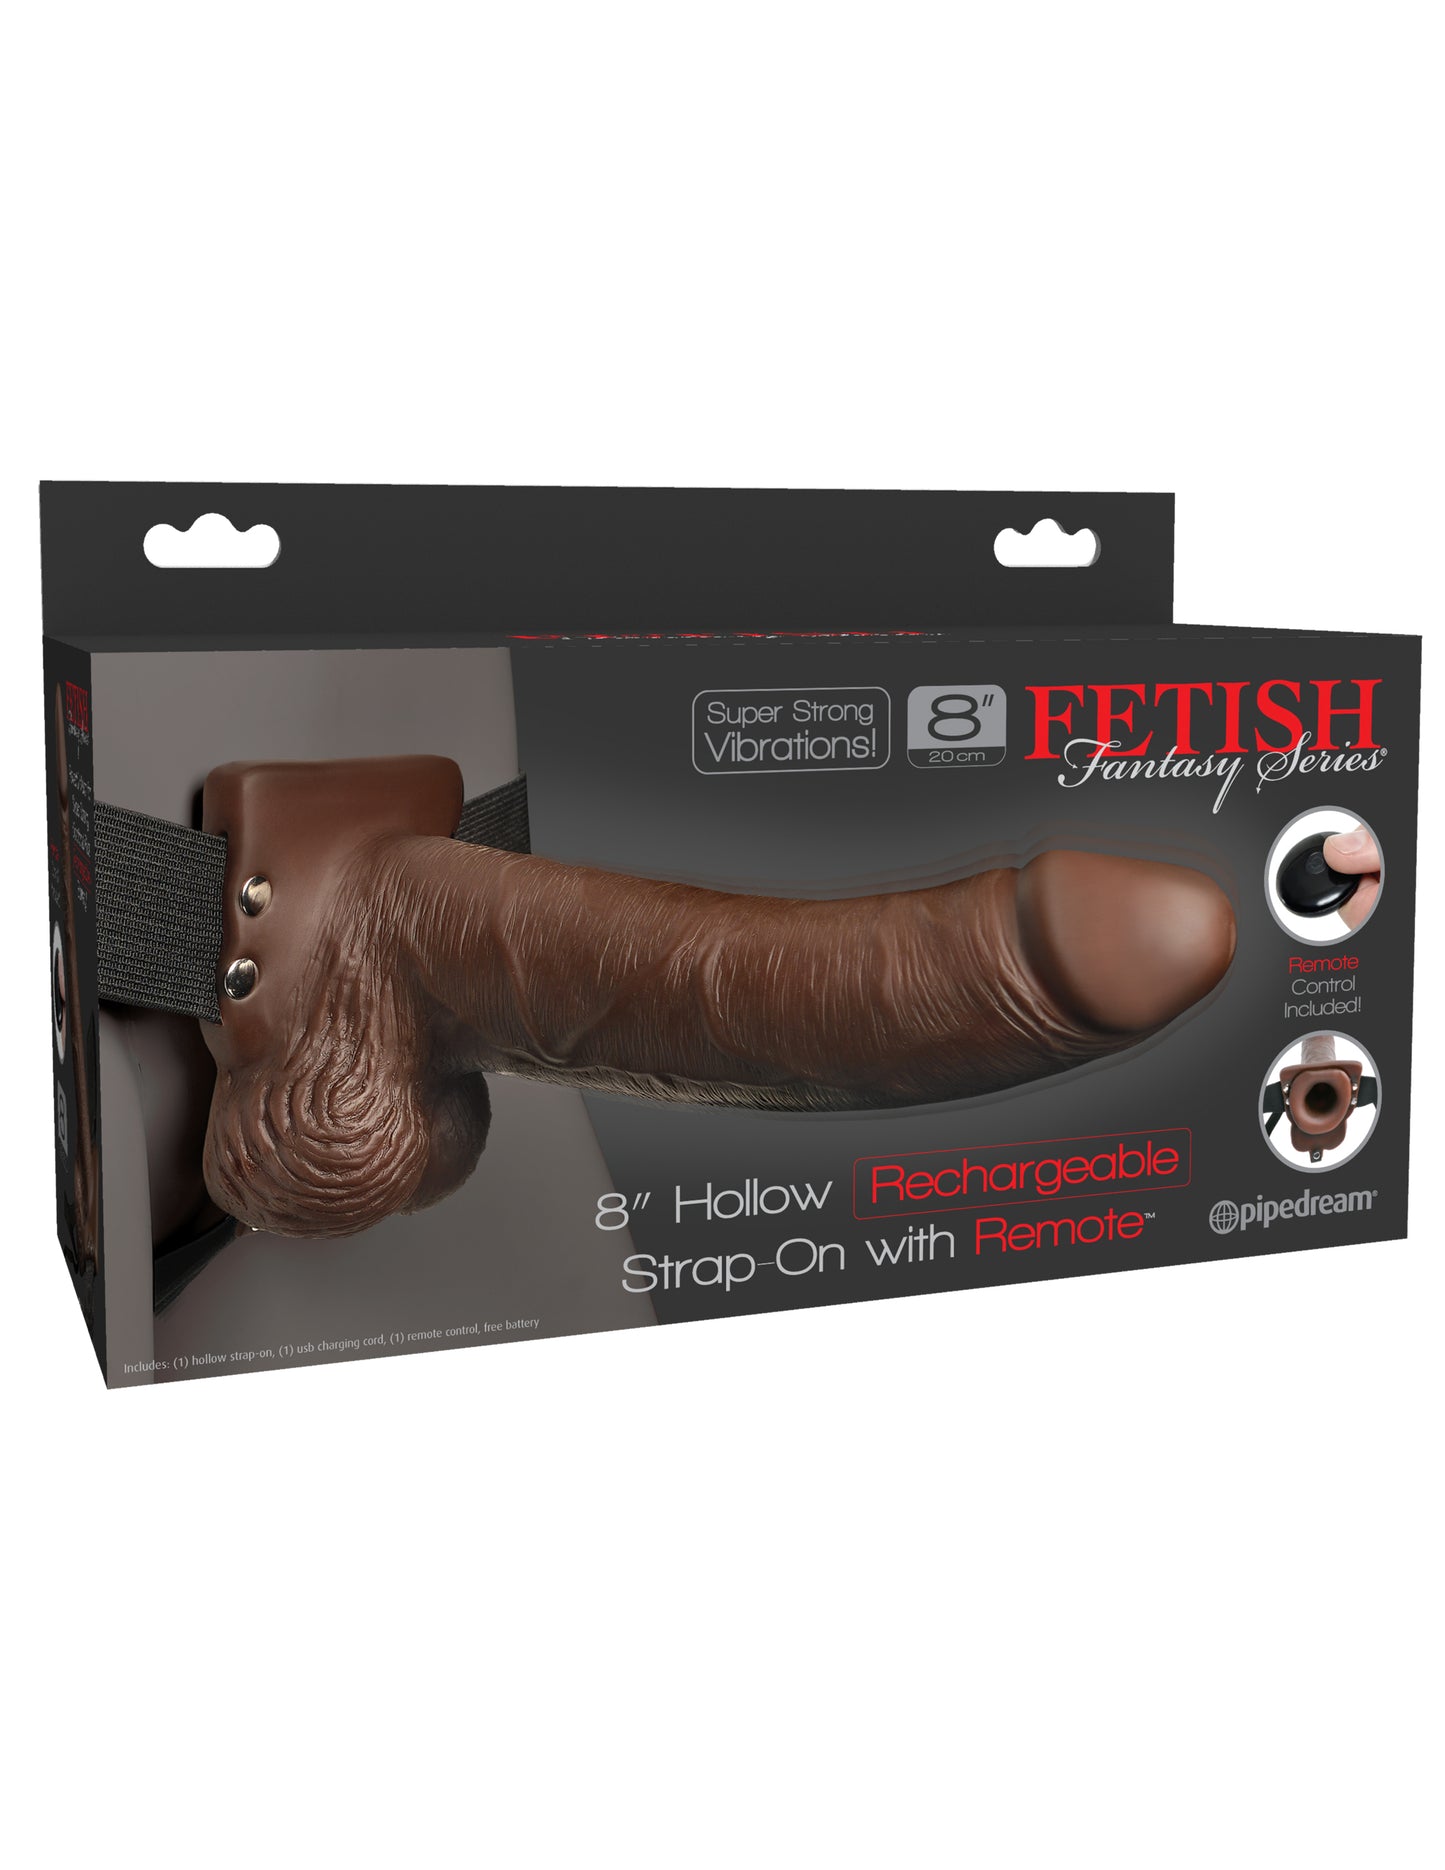 8" Hollow Rechargeable Strap-On with Remote by Fetish Fantasy